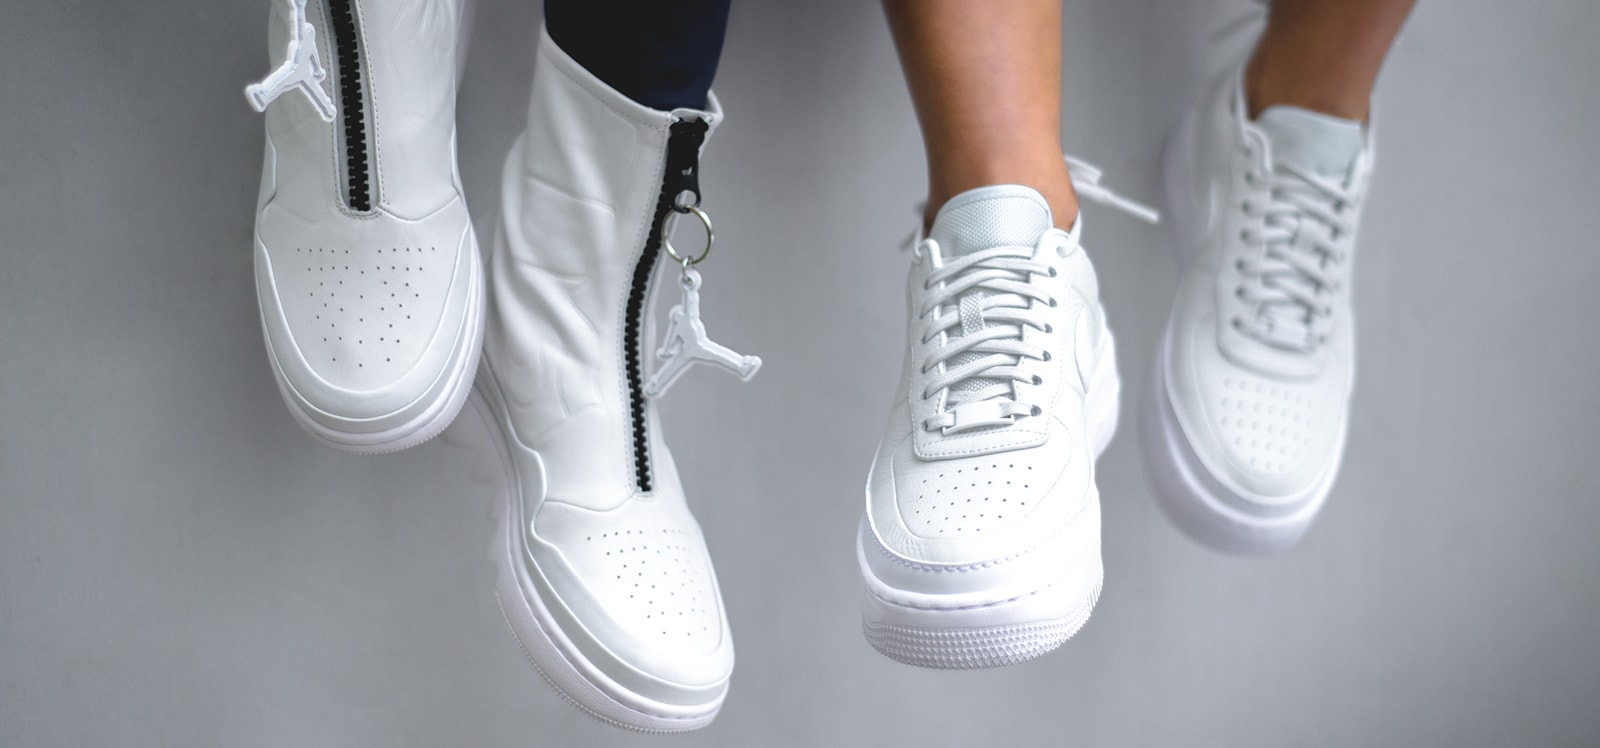 Nike The 1 Reimagined Jester XX Air Force 1 Jordan Jumpman Boot Logo Swoosh Women Female Design Collective Release Date Where to Buy Closer On Feet Look White